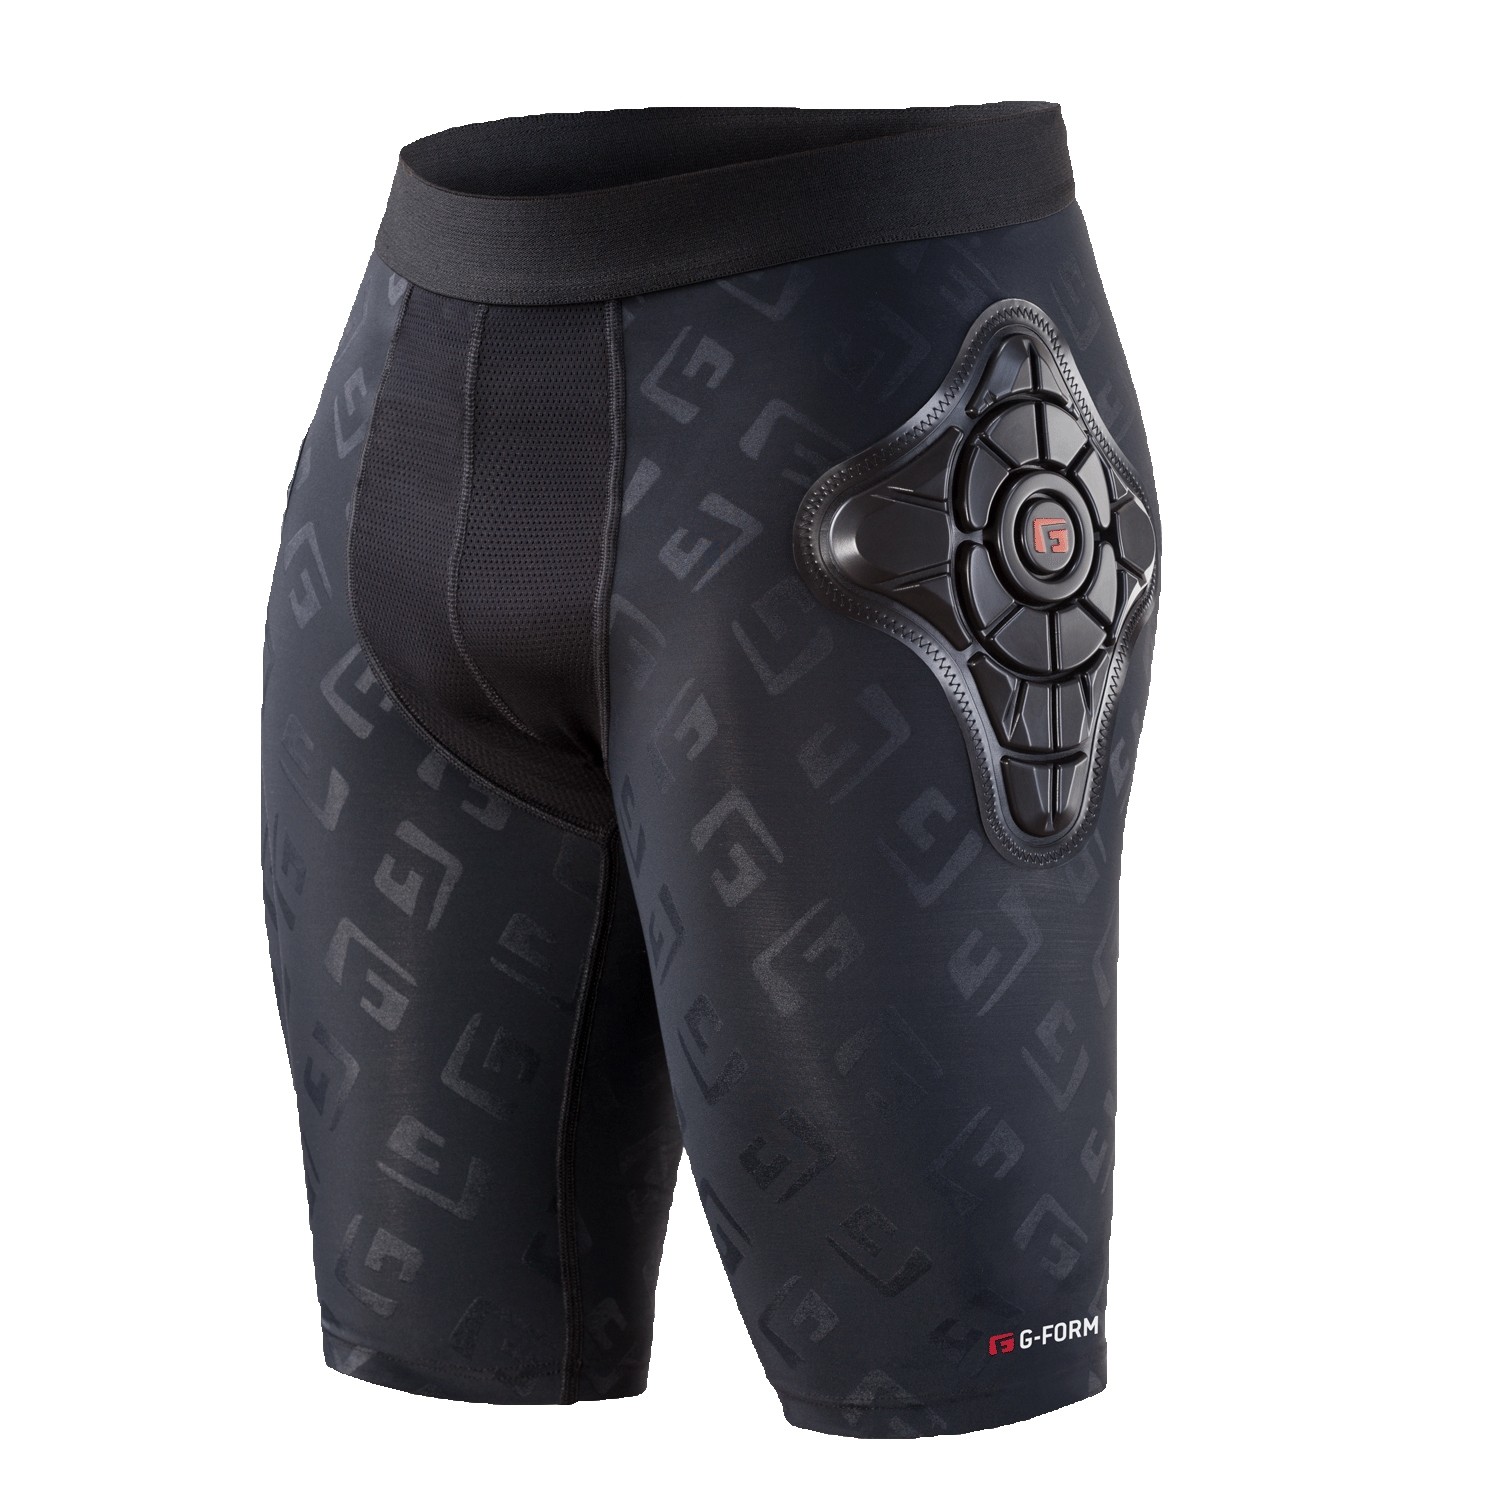 Pro-X Compression Shorts - Youth